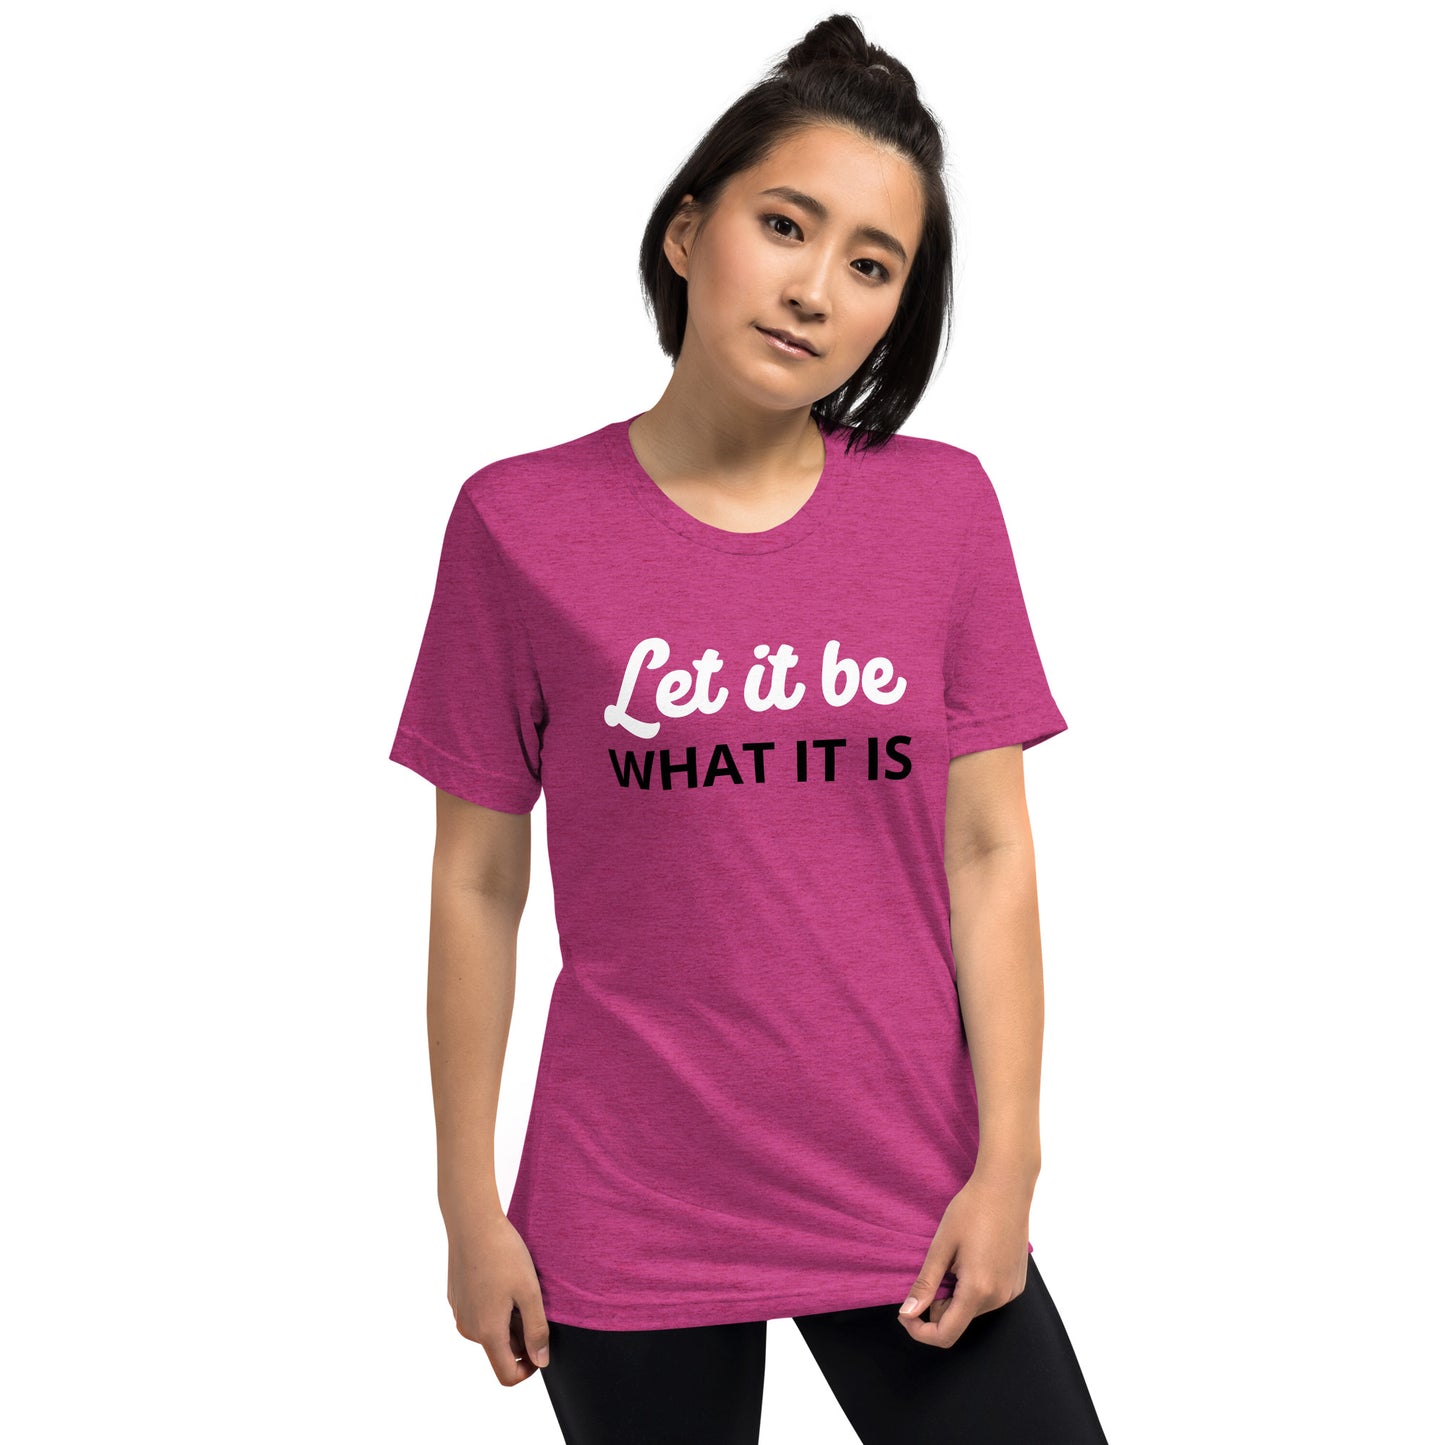 Motivate Merch Let it Be T-Shirt for the Artist who seeks the Spotlight - Pink